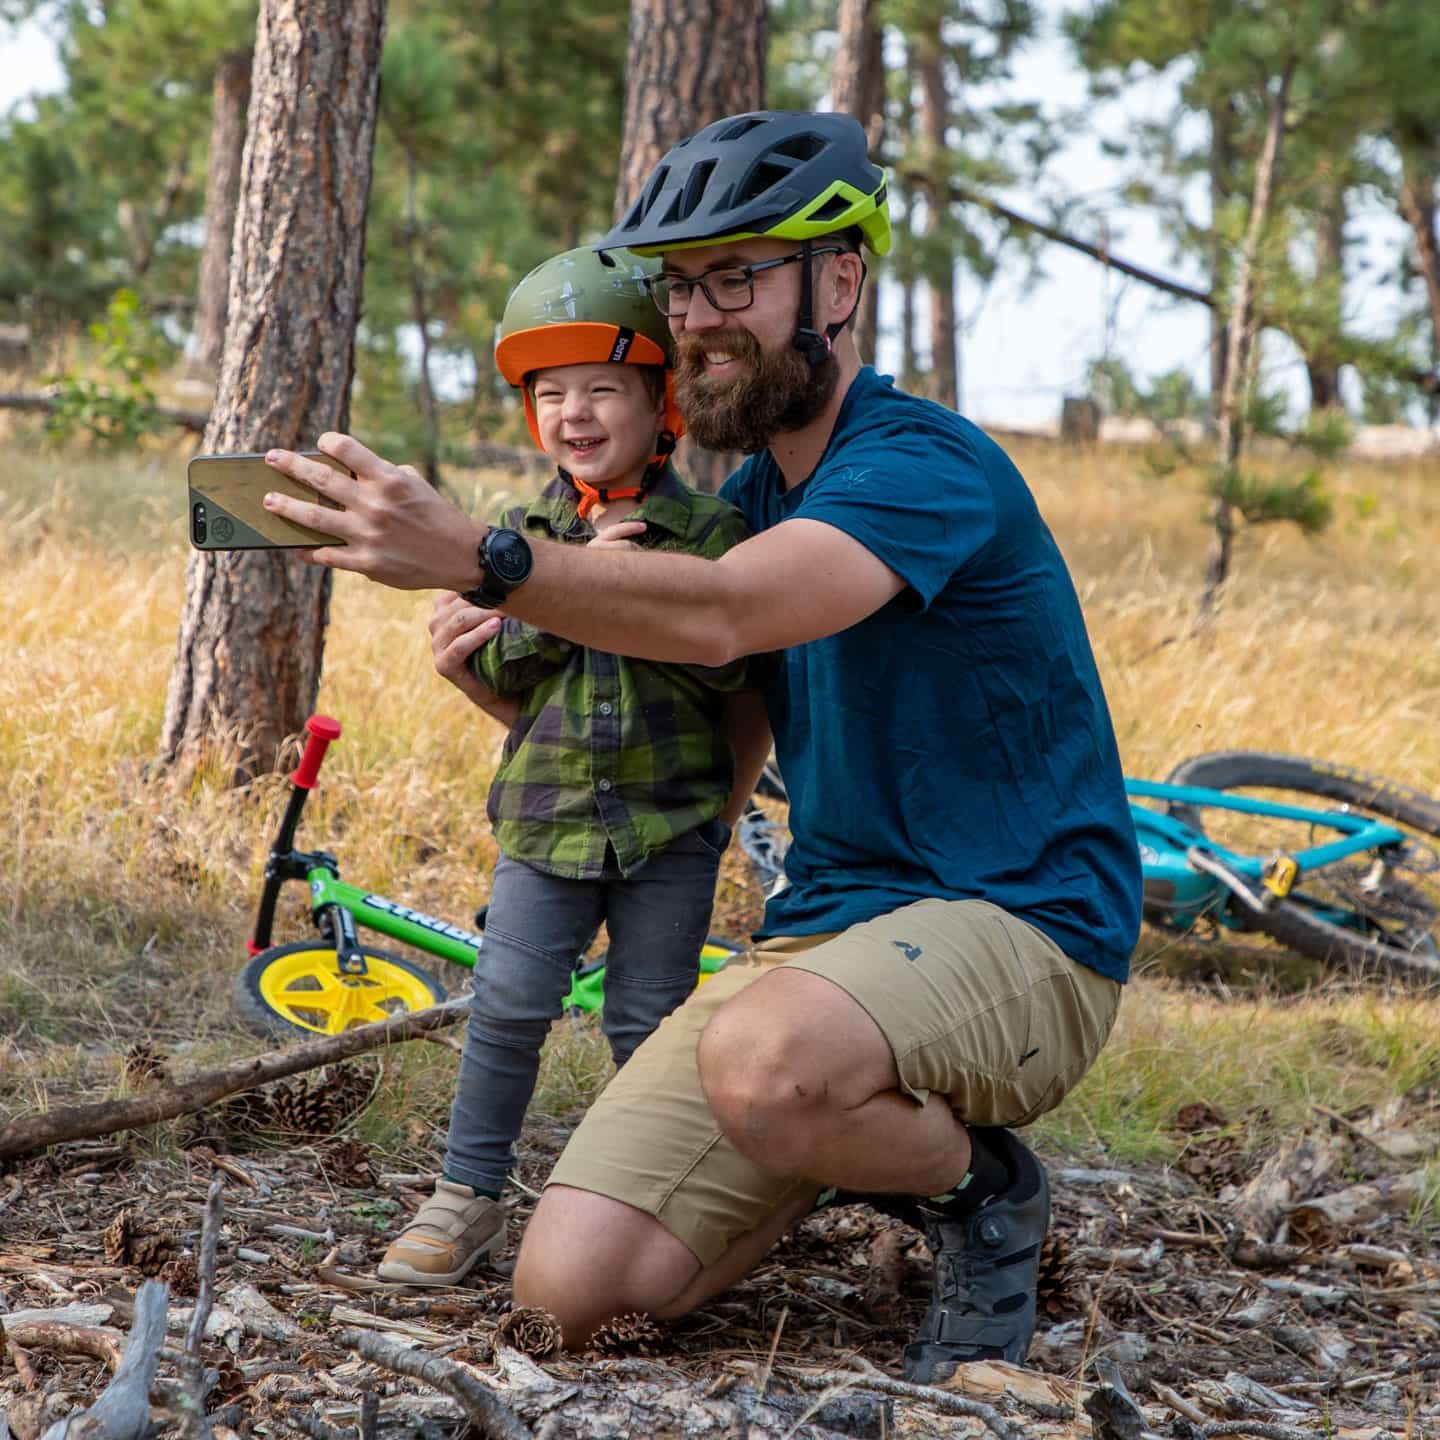 Father takes a selfie with his son in the woods with bikes on the ground in the background